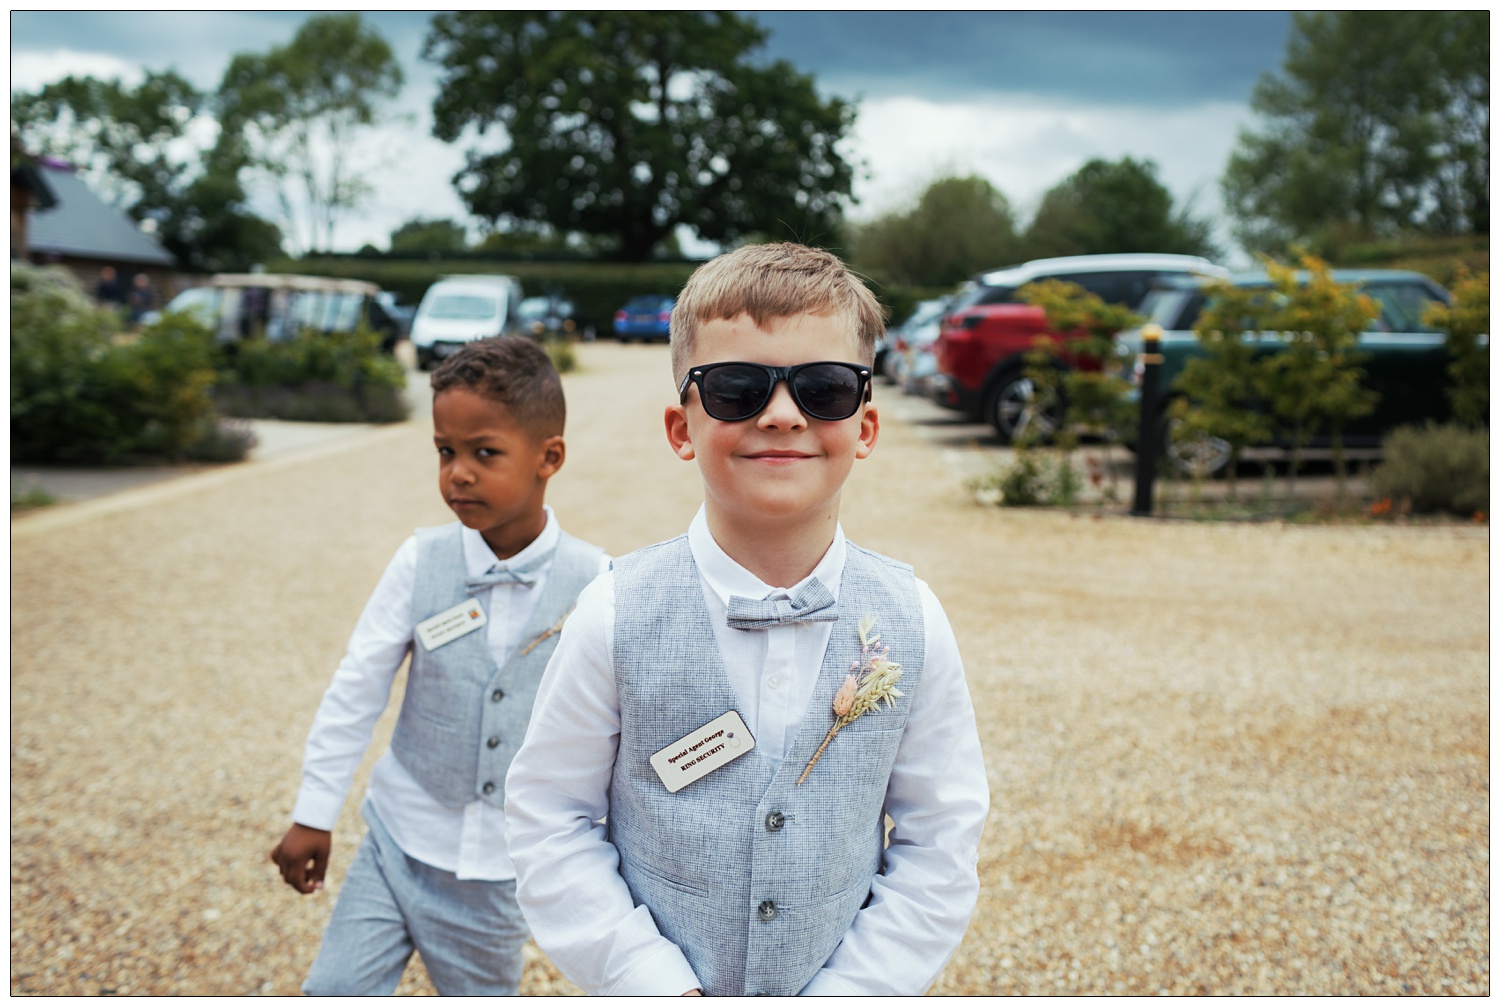 Two young boys in pale blue trousers and waistcoats. They are ring bearers, their badges say "ring security". Boy in foreground is wearing sunglasses.